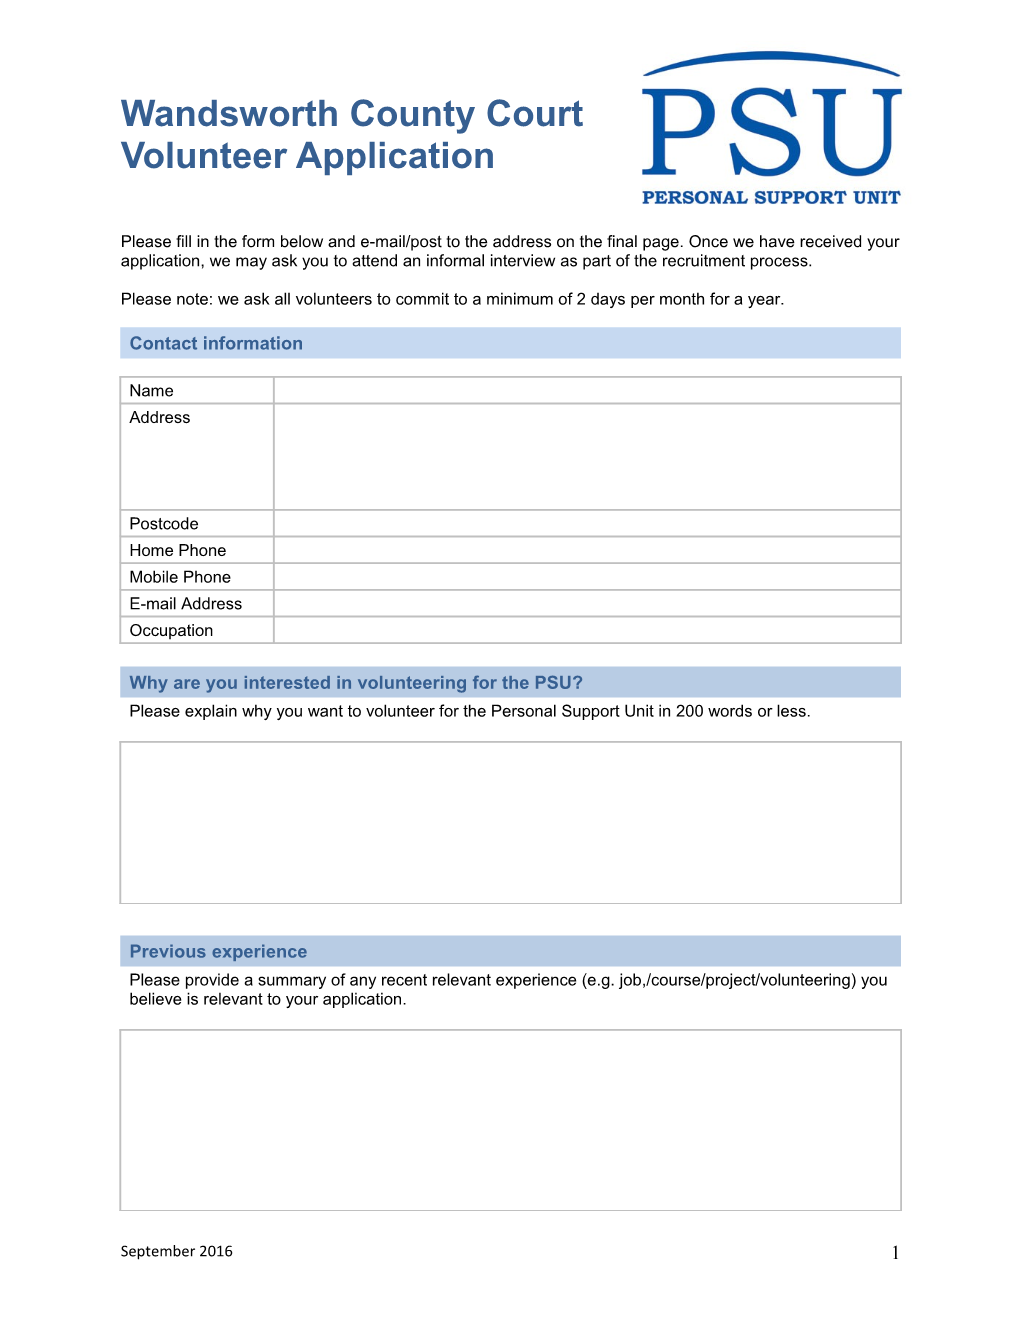 Why Are You Interested in Volunteering for the PSU?